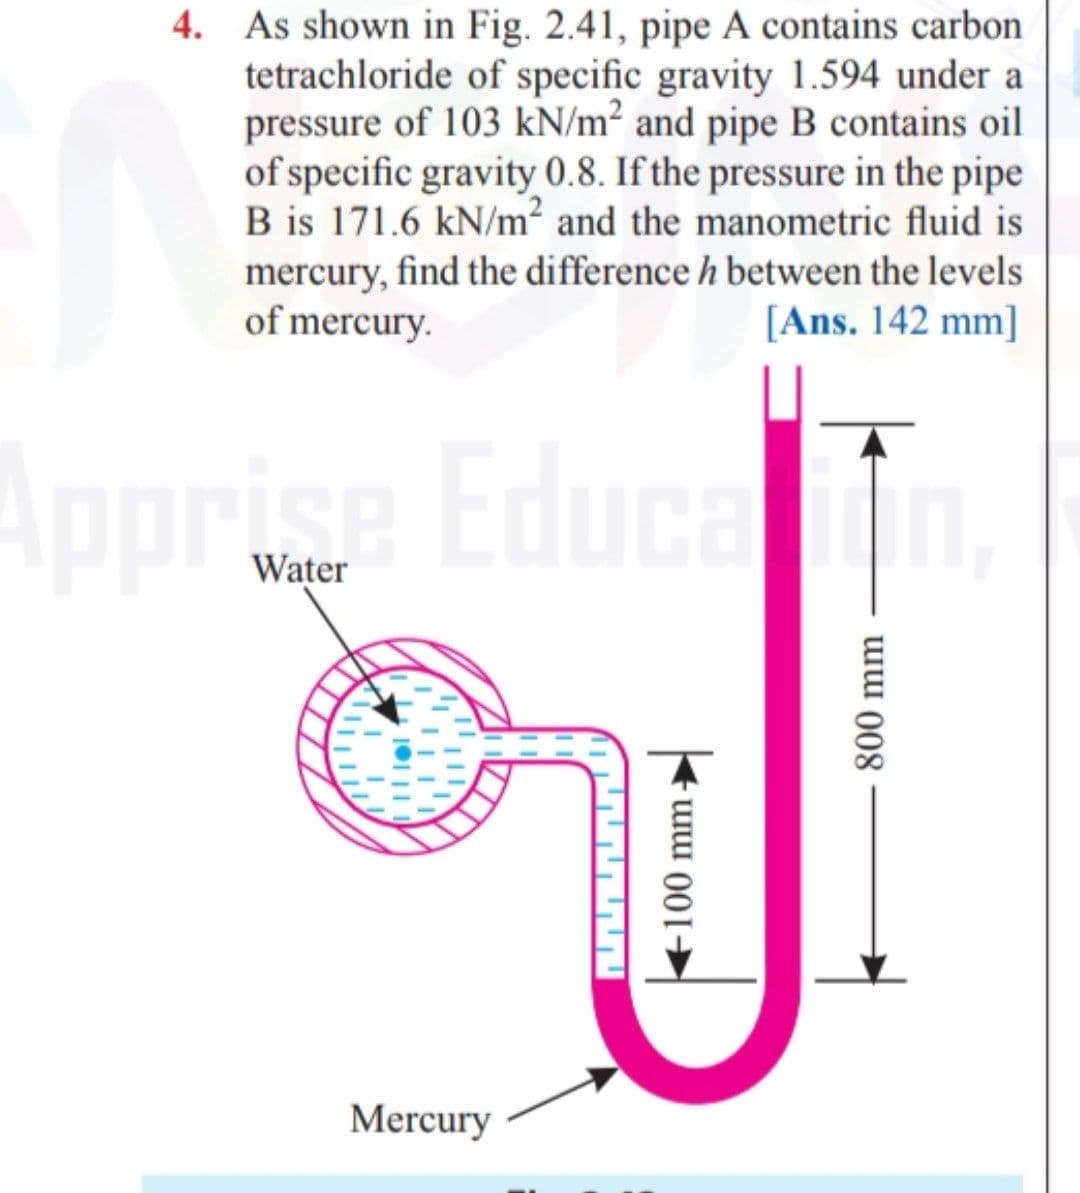 As shown in Fig. 2.41, pipe A contains carbon
tetrachloride of specific gravity 1.594 under a
pressure of 103 kN/m² and pipe B contains oil
of specific gravity 0.8. If the pressure in the pipe
B is 171.6 kN/m² and the manometric fluid is
mercury, find the difference h between the levels
of mercury.
[Ans. 142 mm]
Apprise Educa i
Water
Mercury
ת תתגתדי
+100 mm
800 mm
